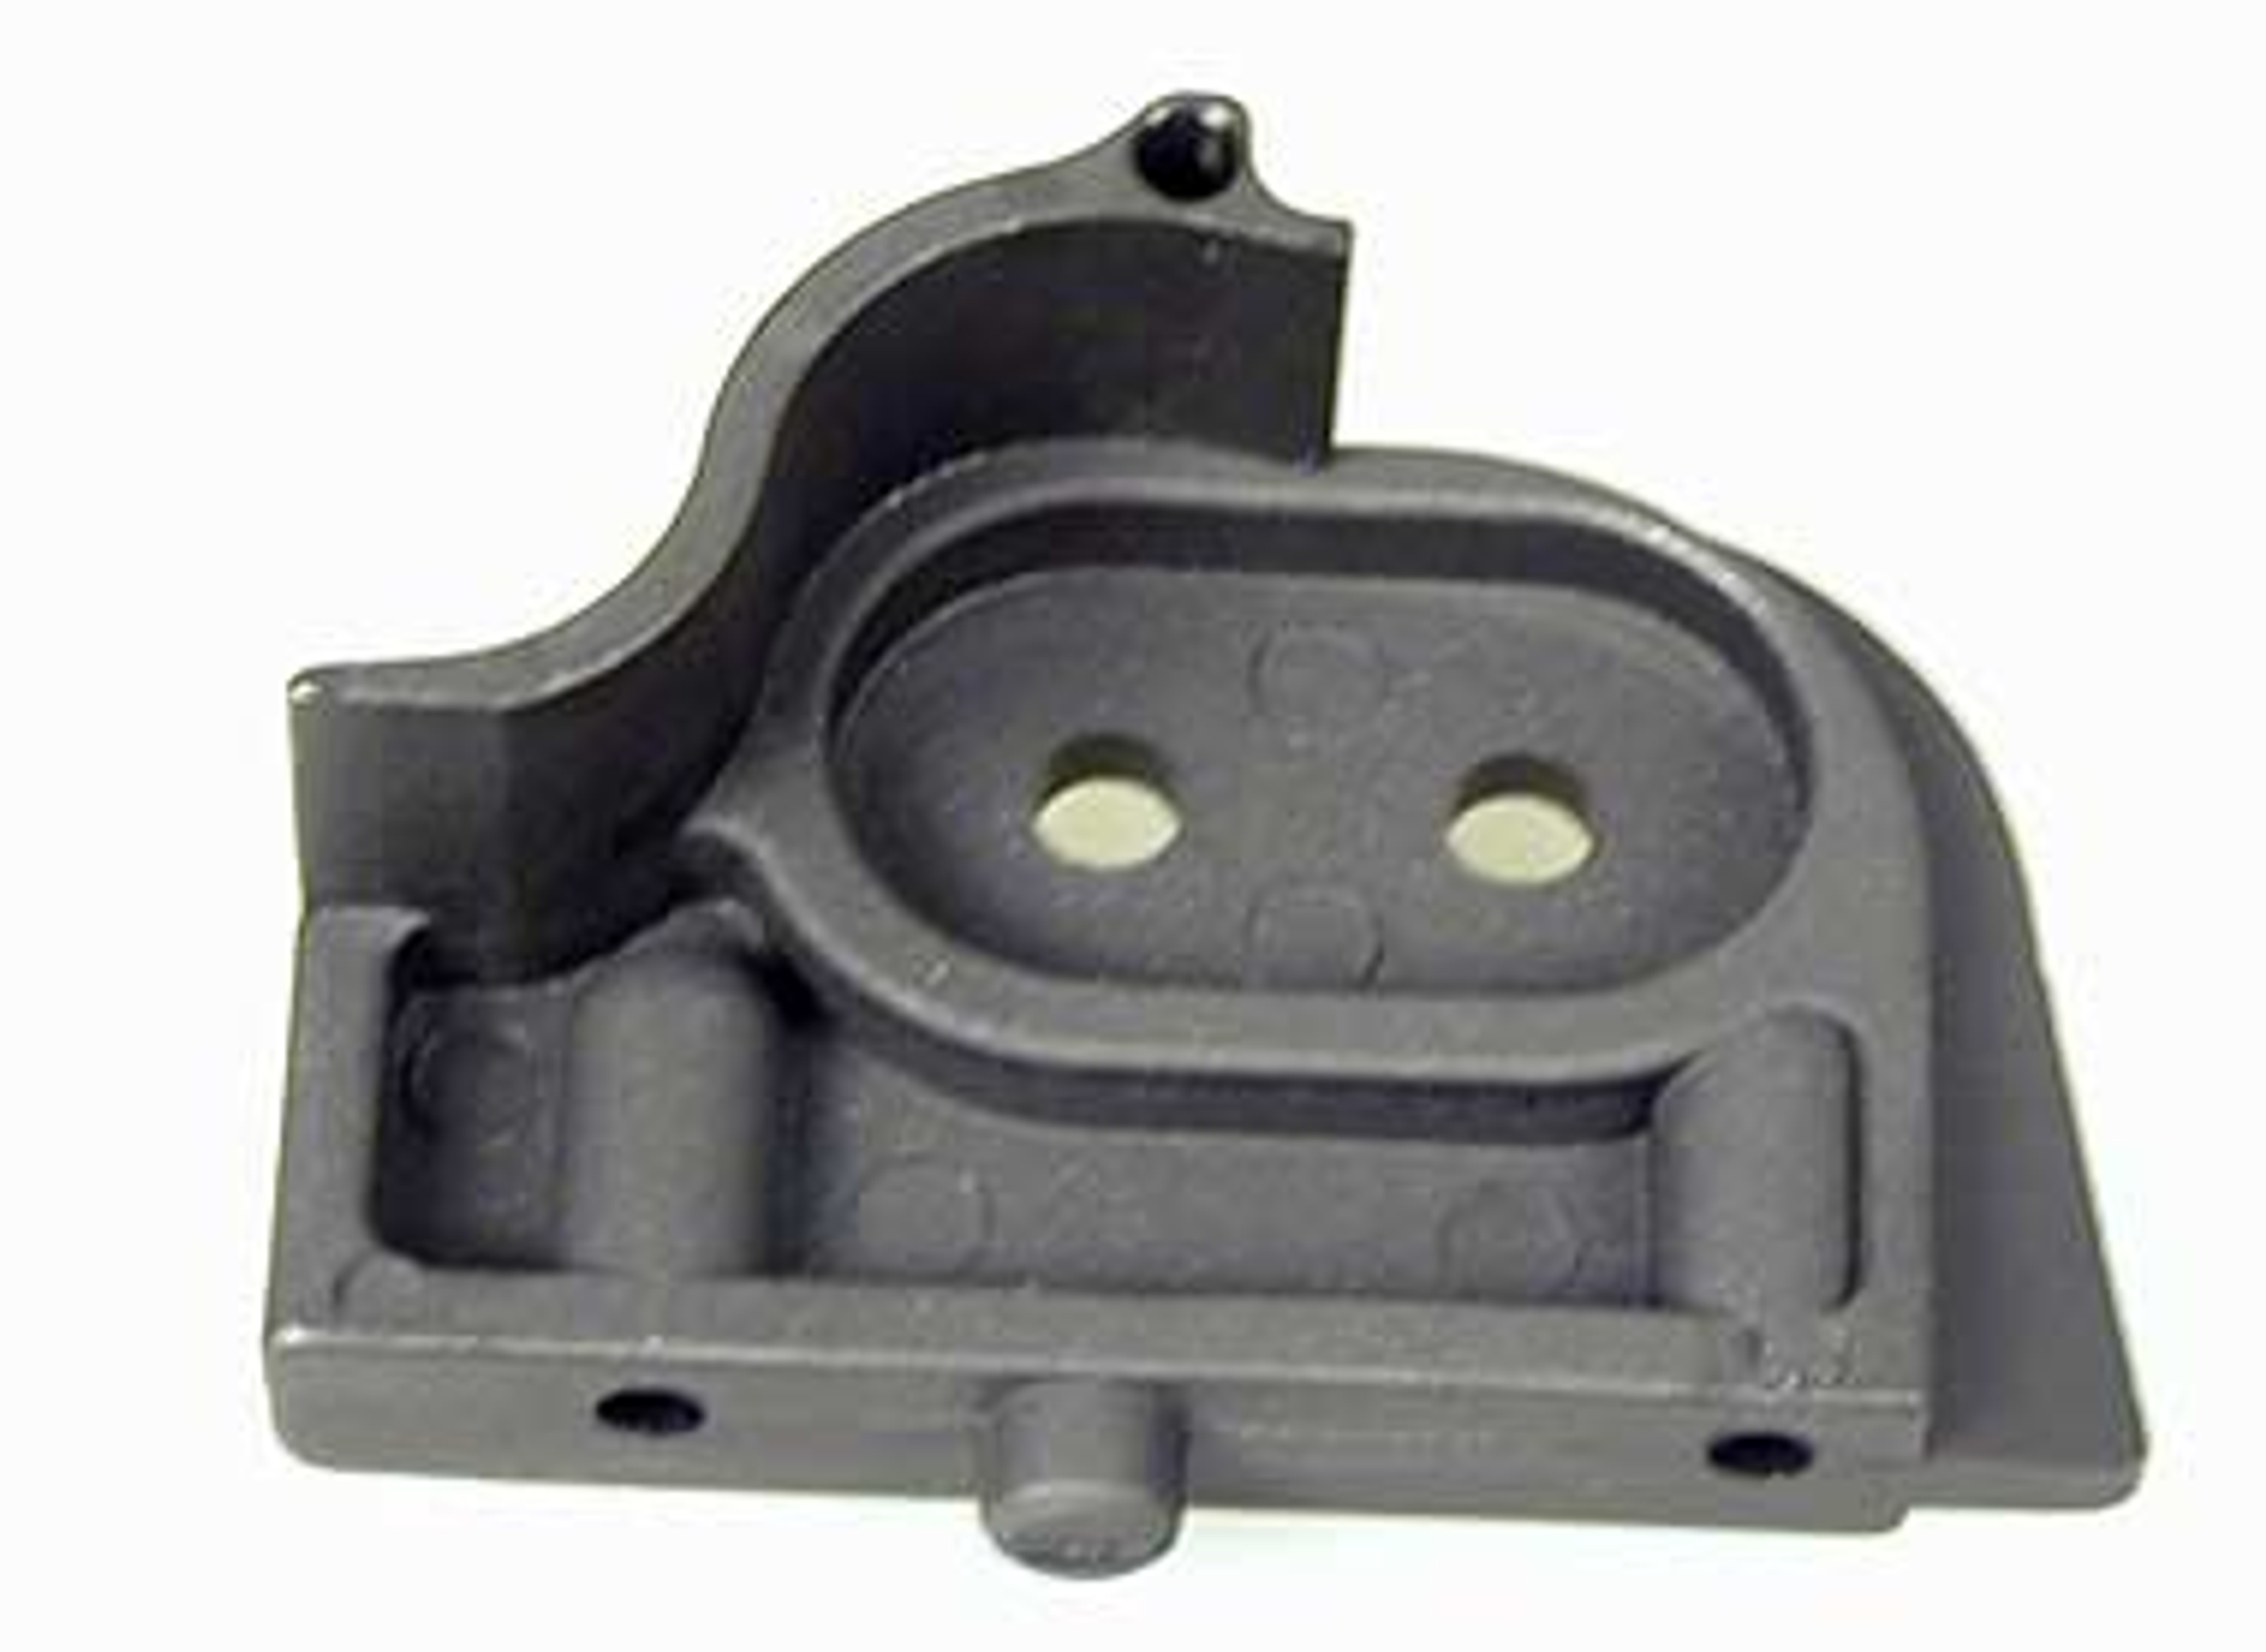 68221, FG Tensioning pulley case, r/h 4WD, plastic, 1pce